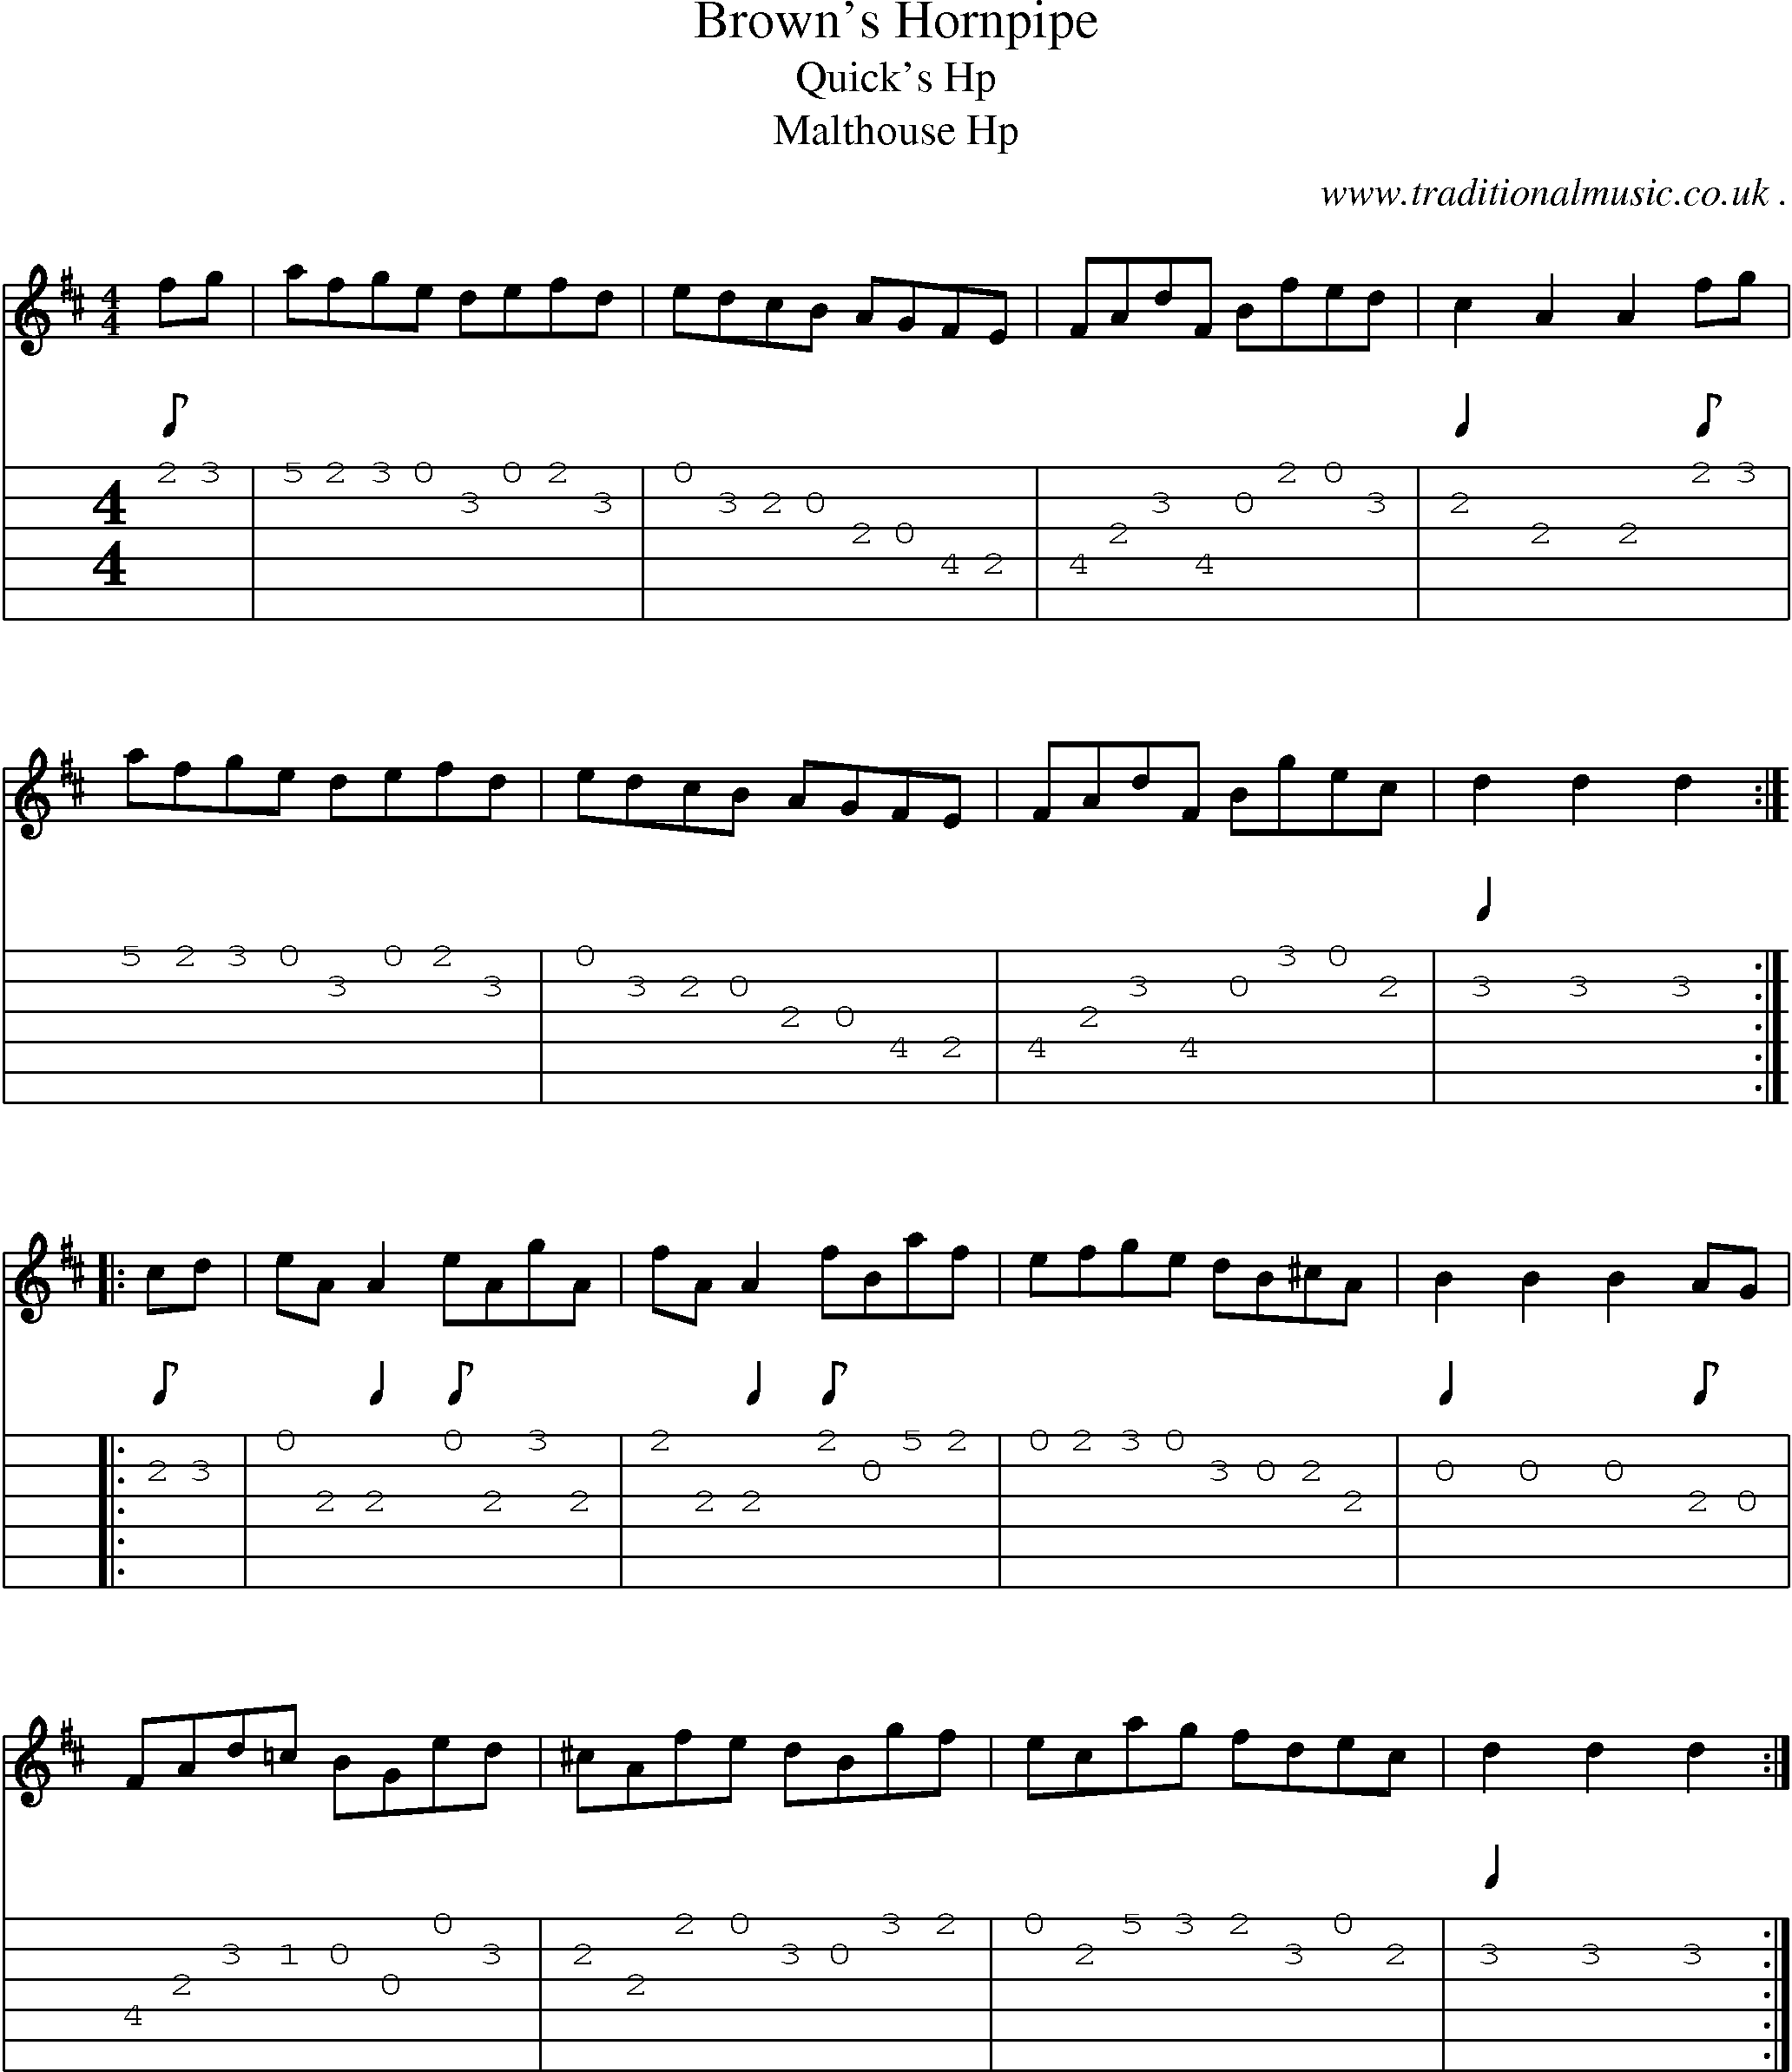 Sheet-Music and Guitar Tabs for Browns Hornpipe